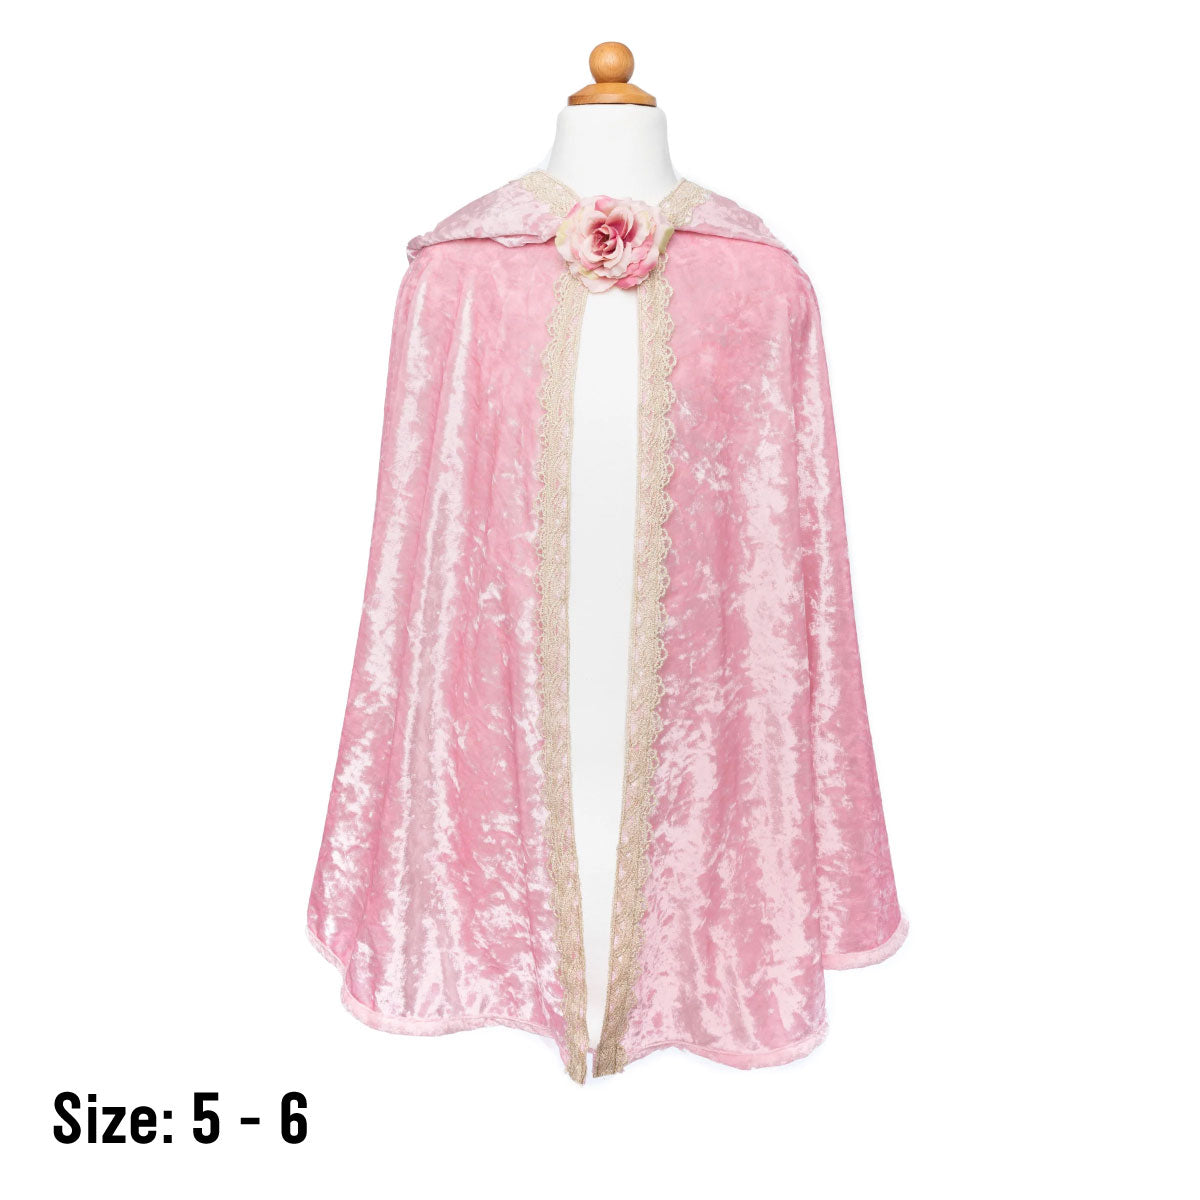 Deluxe Pink Princess Cape Size 5-6